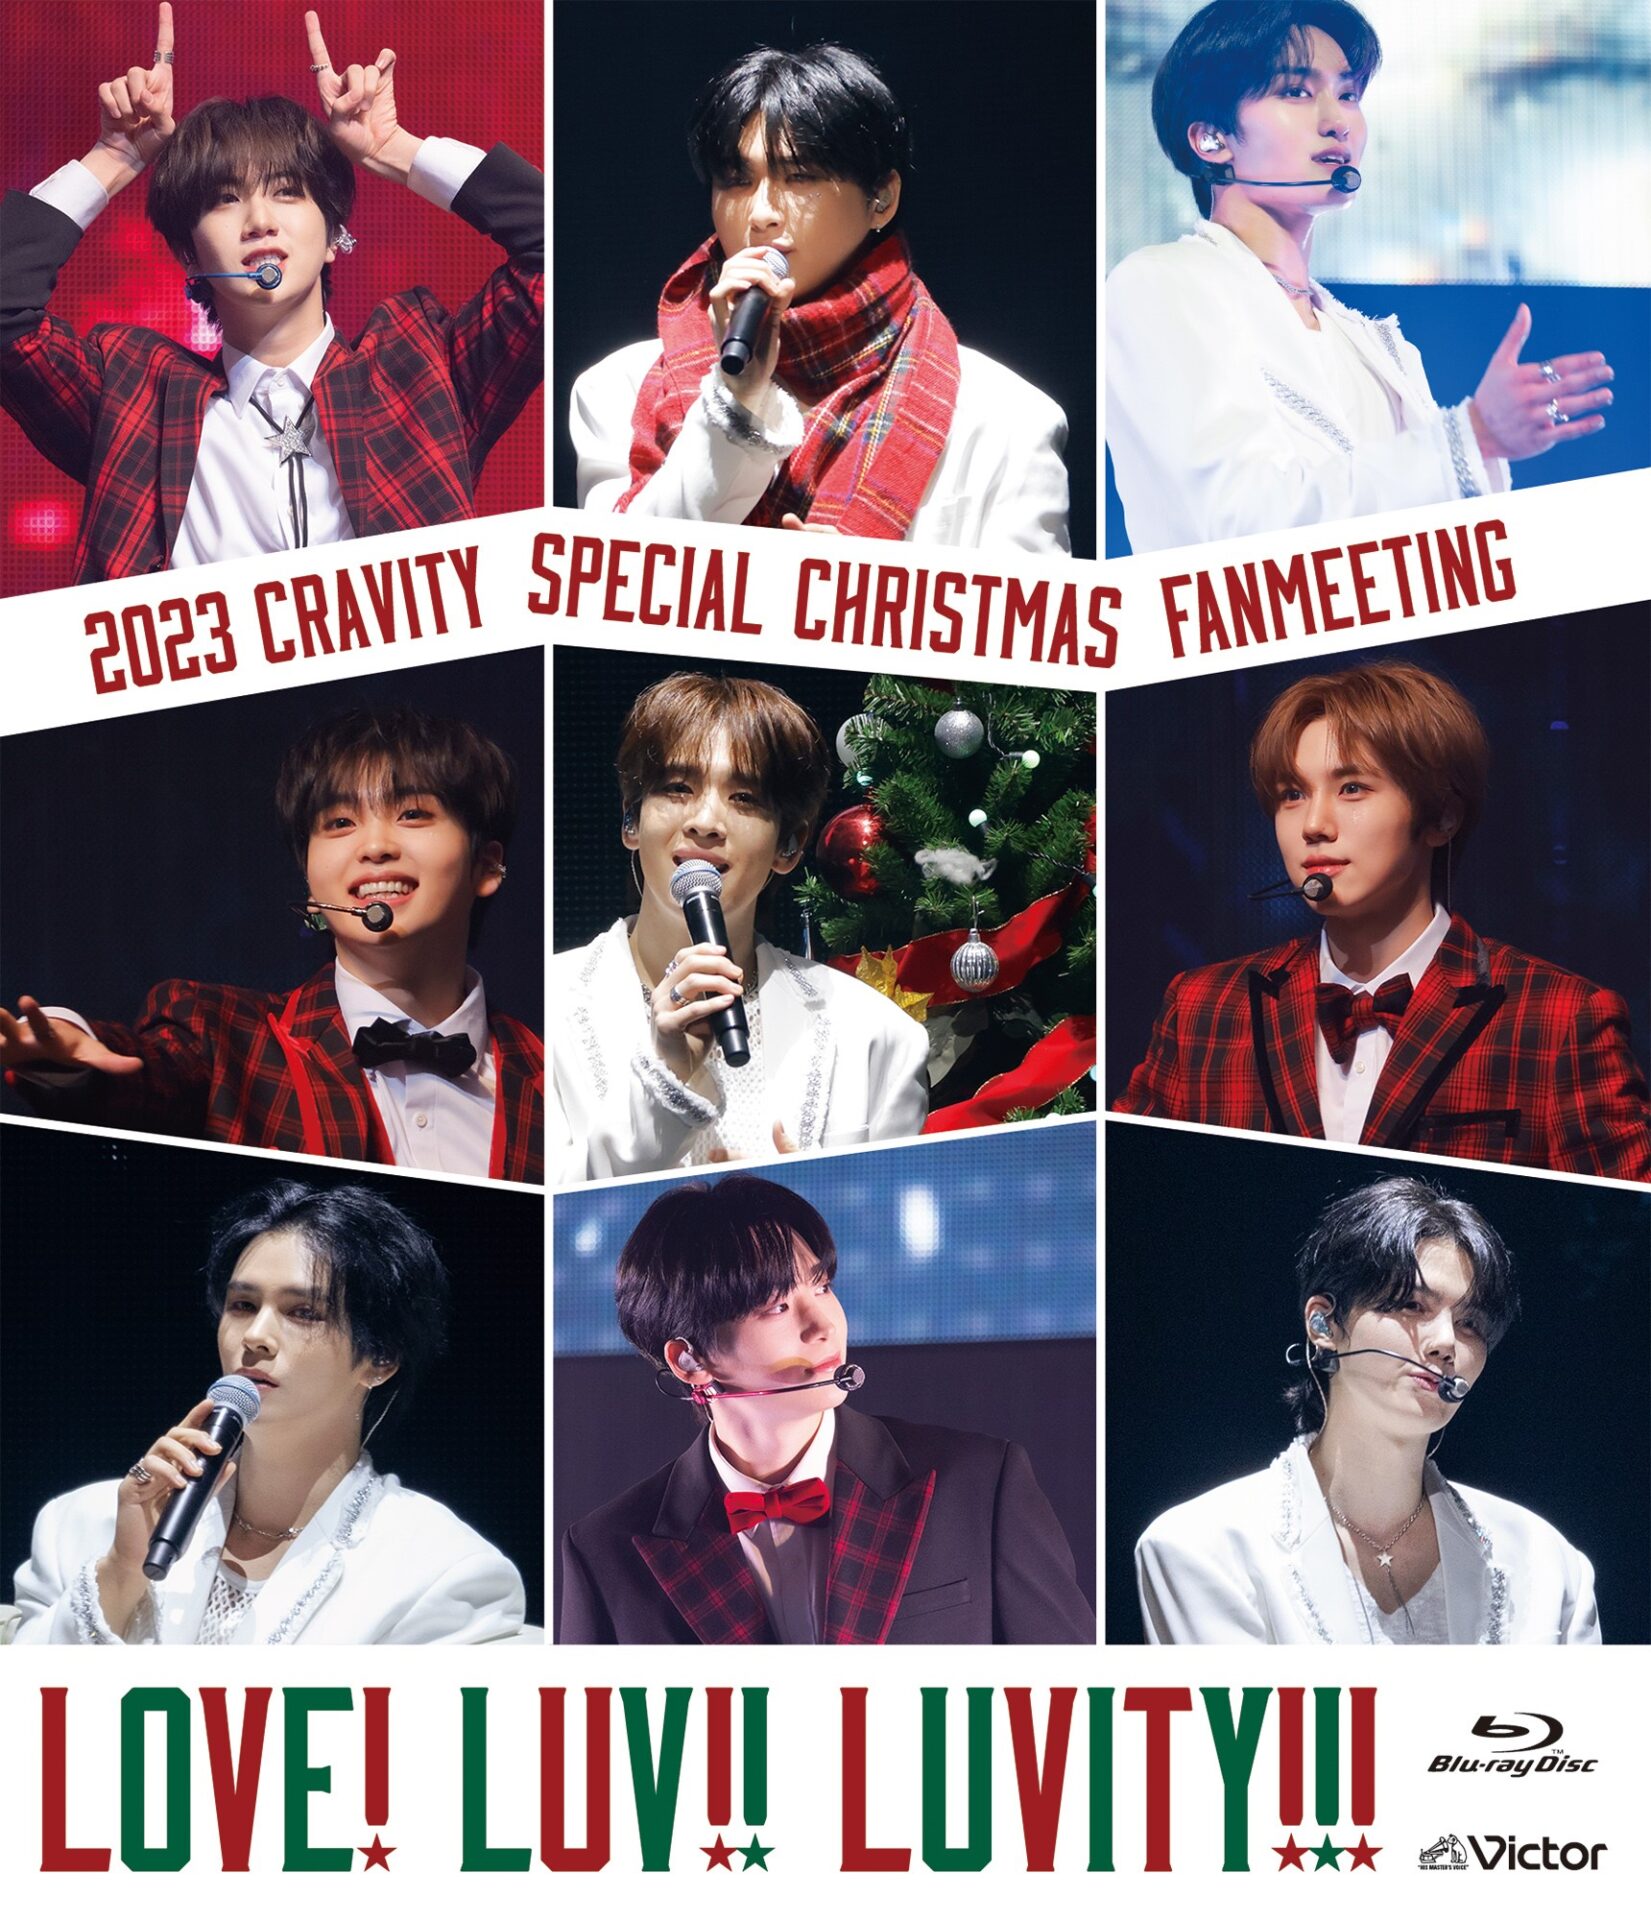 『2023 CRAVITY SPECIAL CHRISTMAS FANMEETING - LOVE! LUV!! LUVITY!!! -』ファンクラブ盤ジャケット